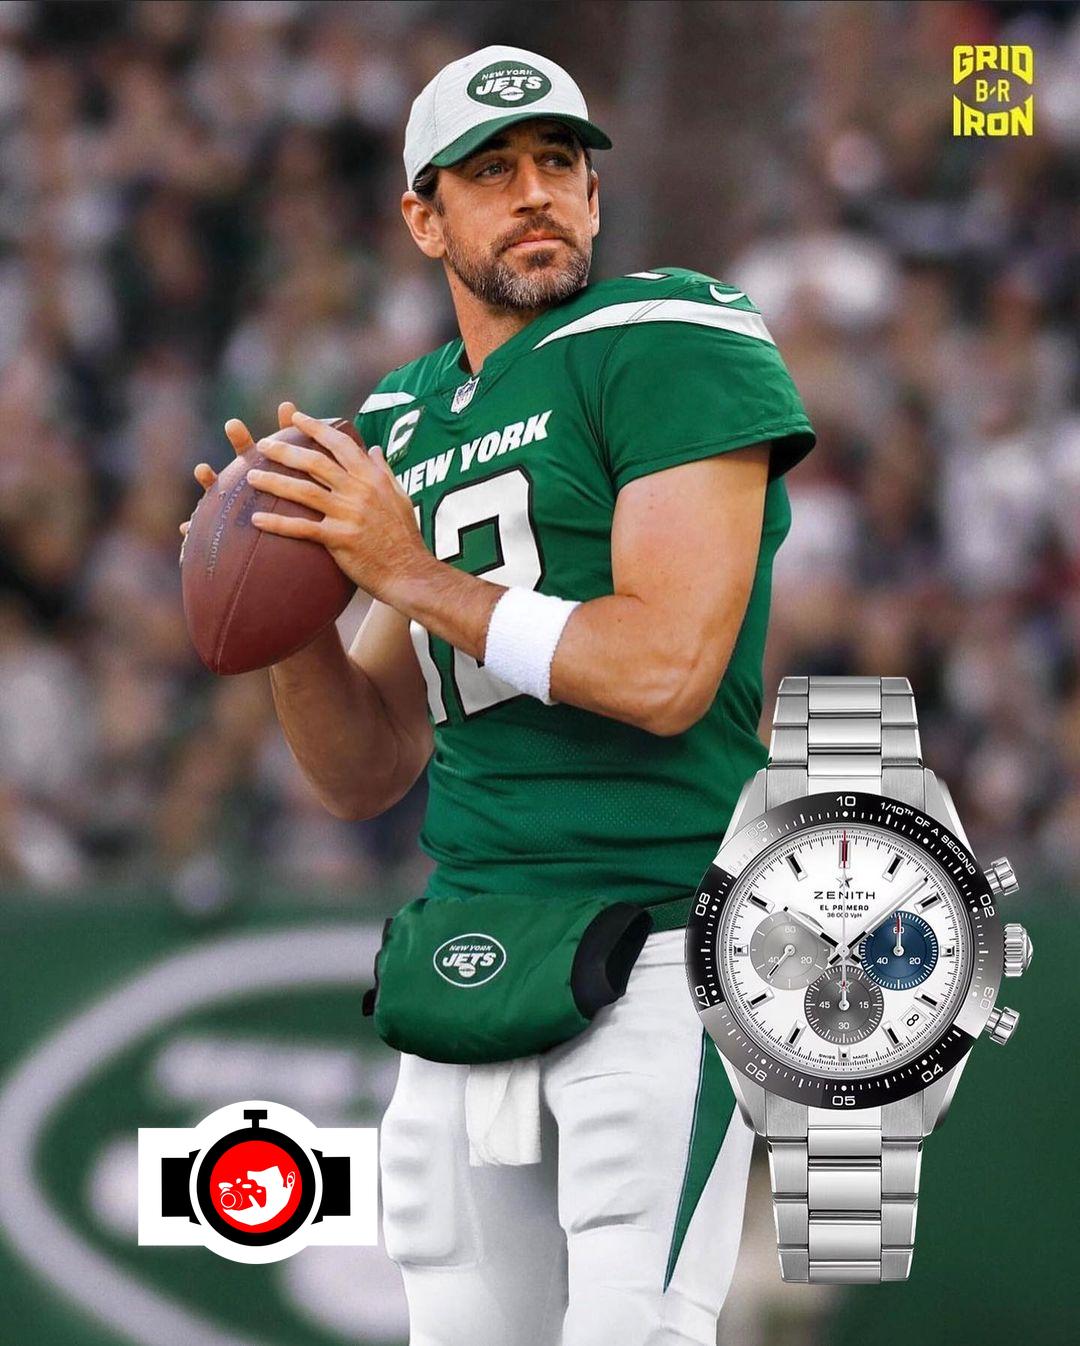 american football player Aaron Rodgers spotted wearing a Zenith 